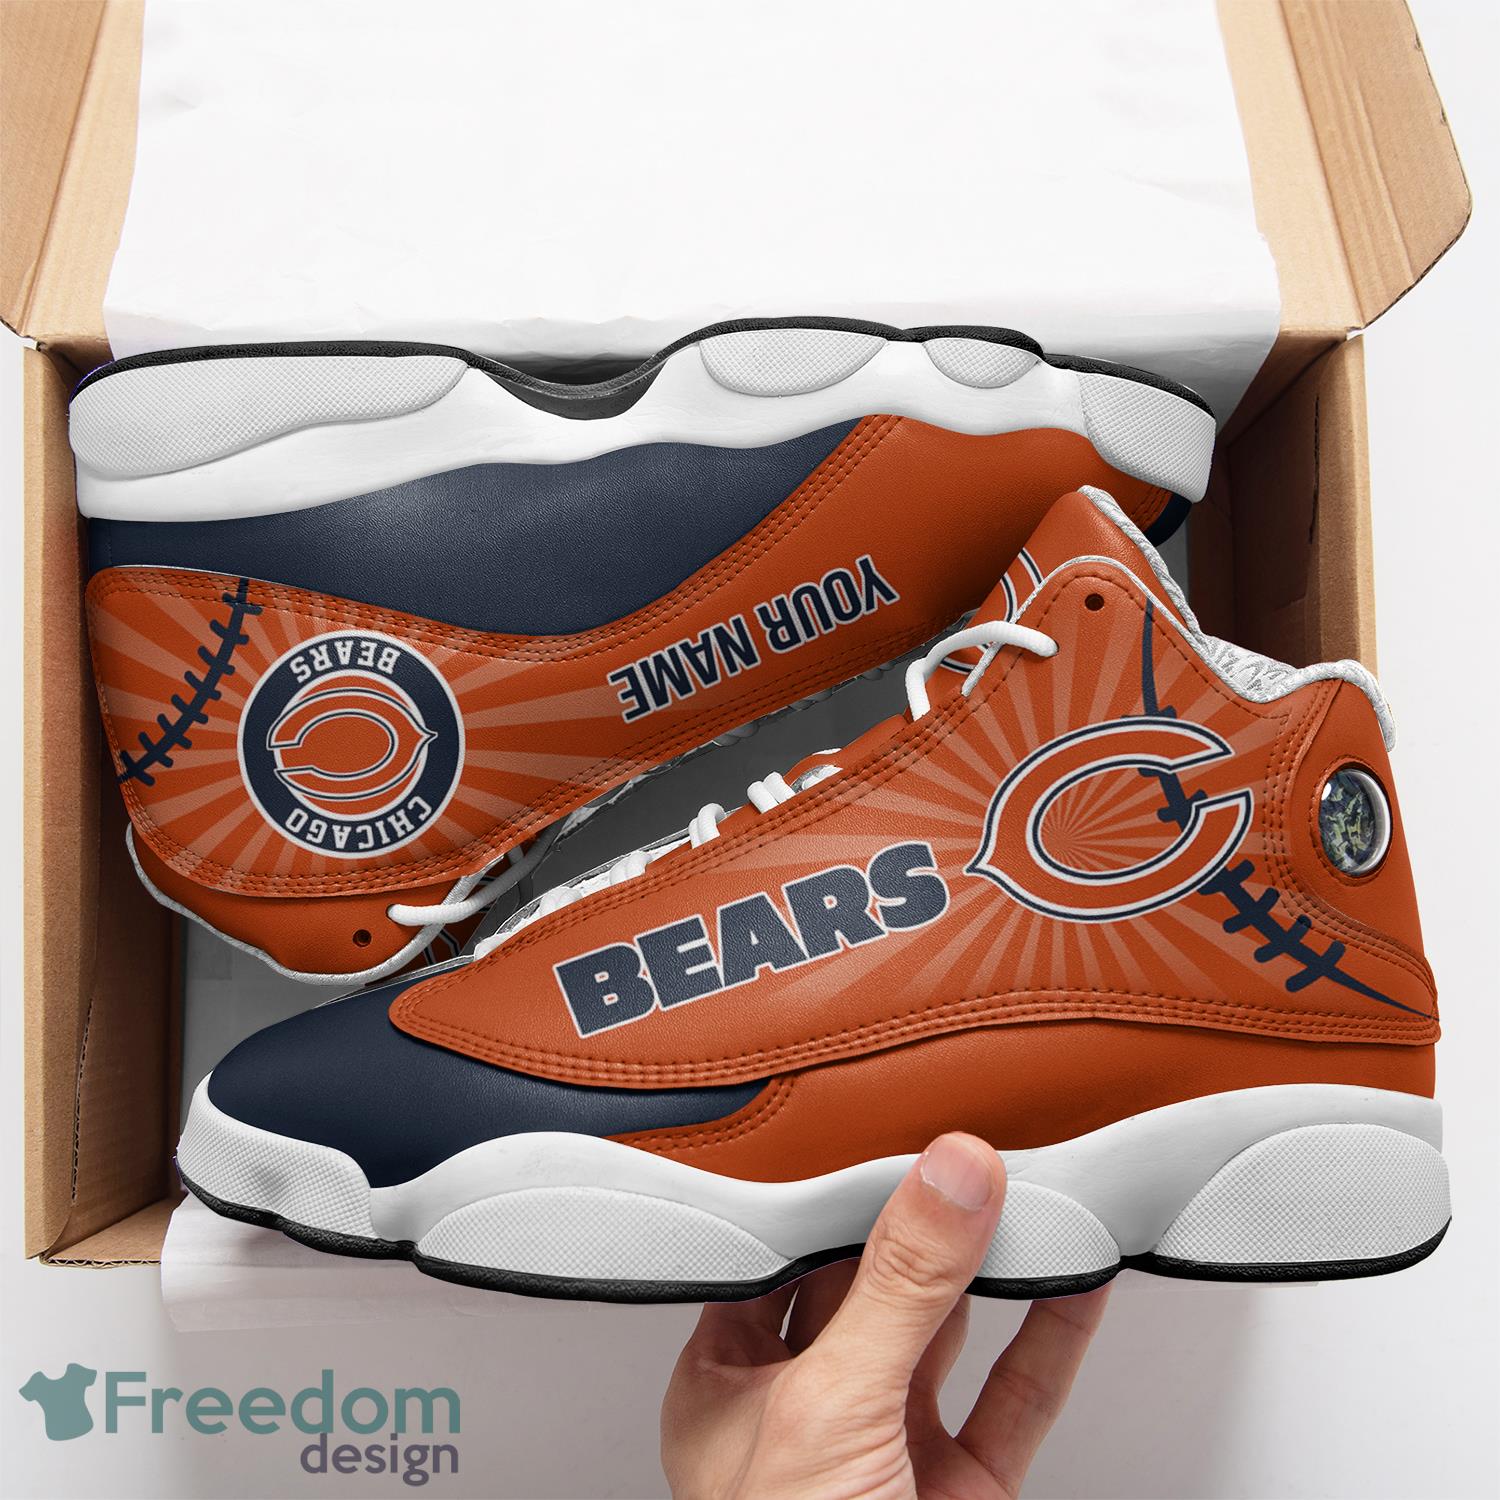 Chicago Bears Personalized Air Jordan 13 Sneakers Sport Gift Shoes For Fan POD  Design - Macall Cloth Store - Destination for fashionistas